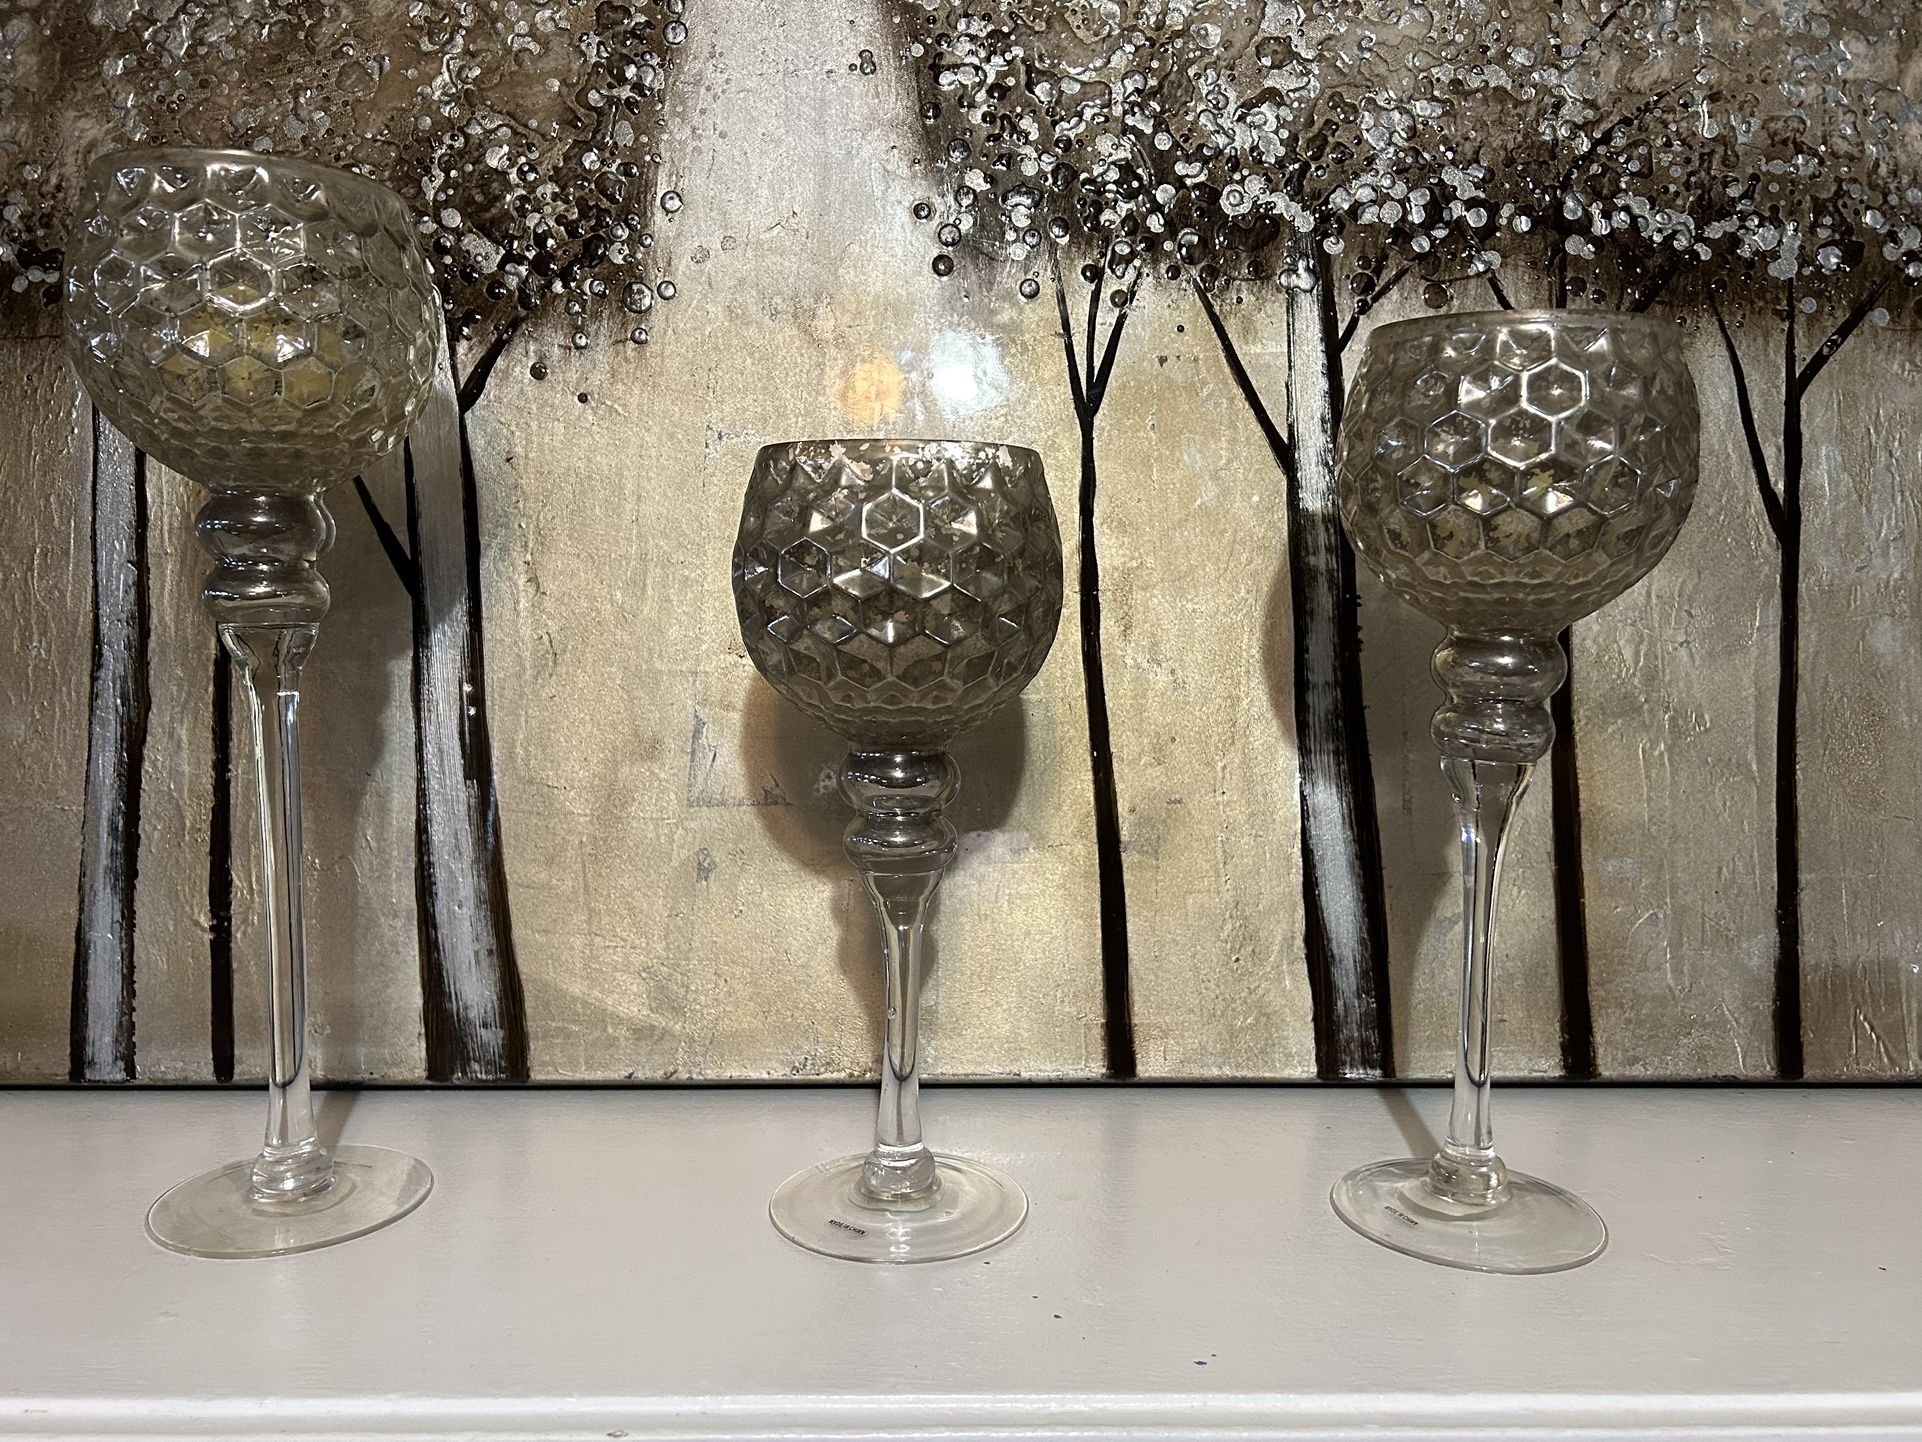  3 Glass Decor Candle Holders